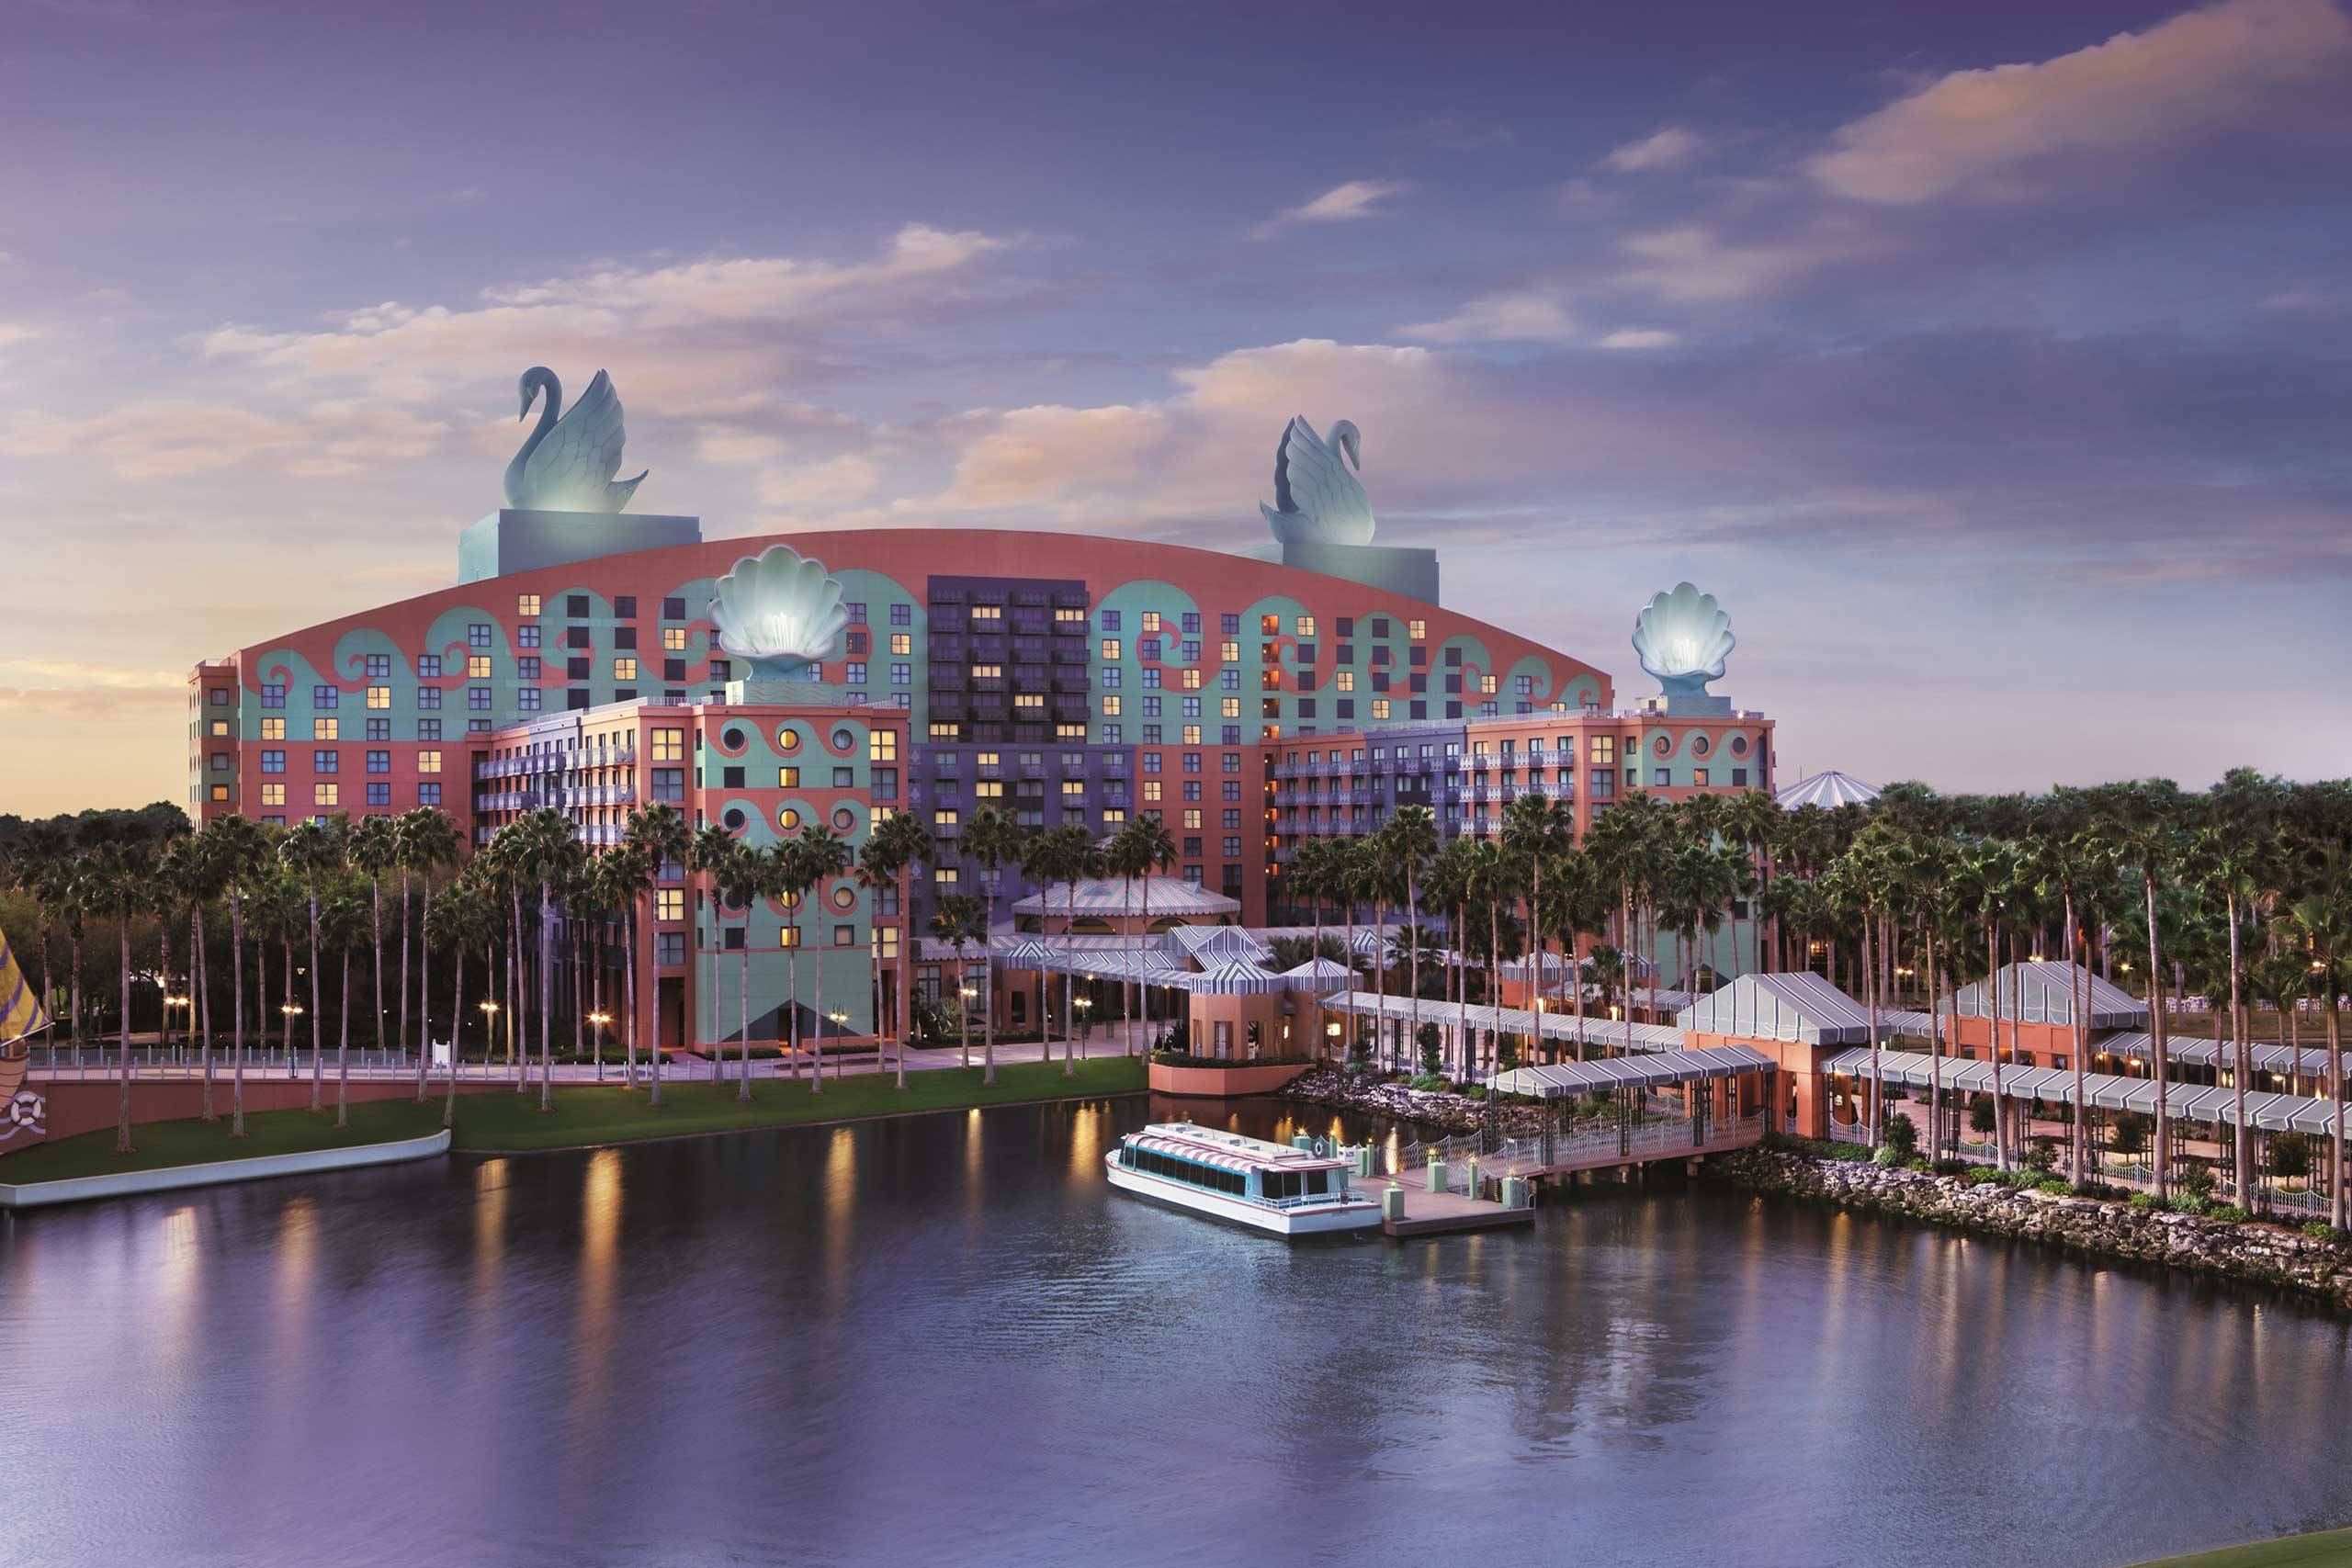 Special WDWMAGIC reader rates for the 4th Annual Food and Wine Classic at the Walt Disney World Swan and Dolphin